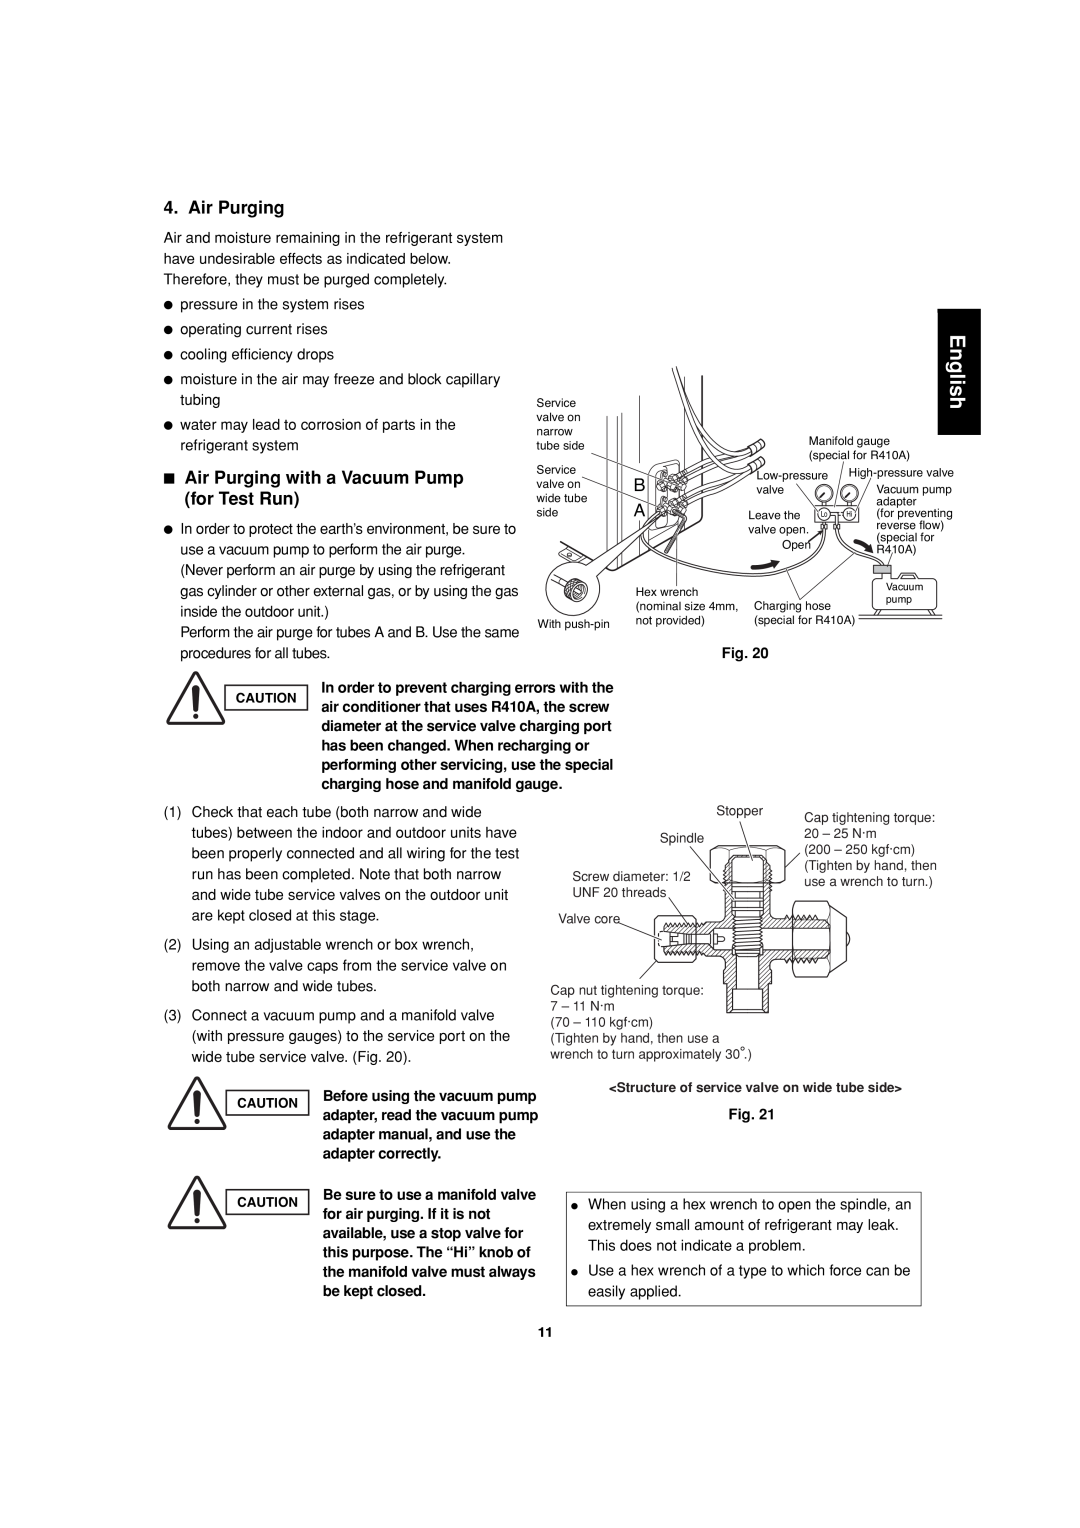 Sanyo SAP-CMRV1426EH-F, SAP-CMRV1926EH service manual English, Air Purging with a Vacuum Pump for Test Run, Fig 